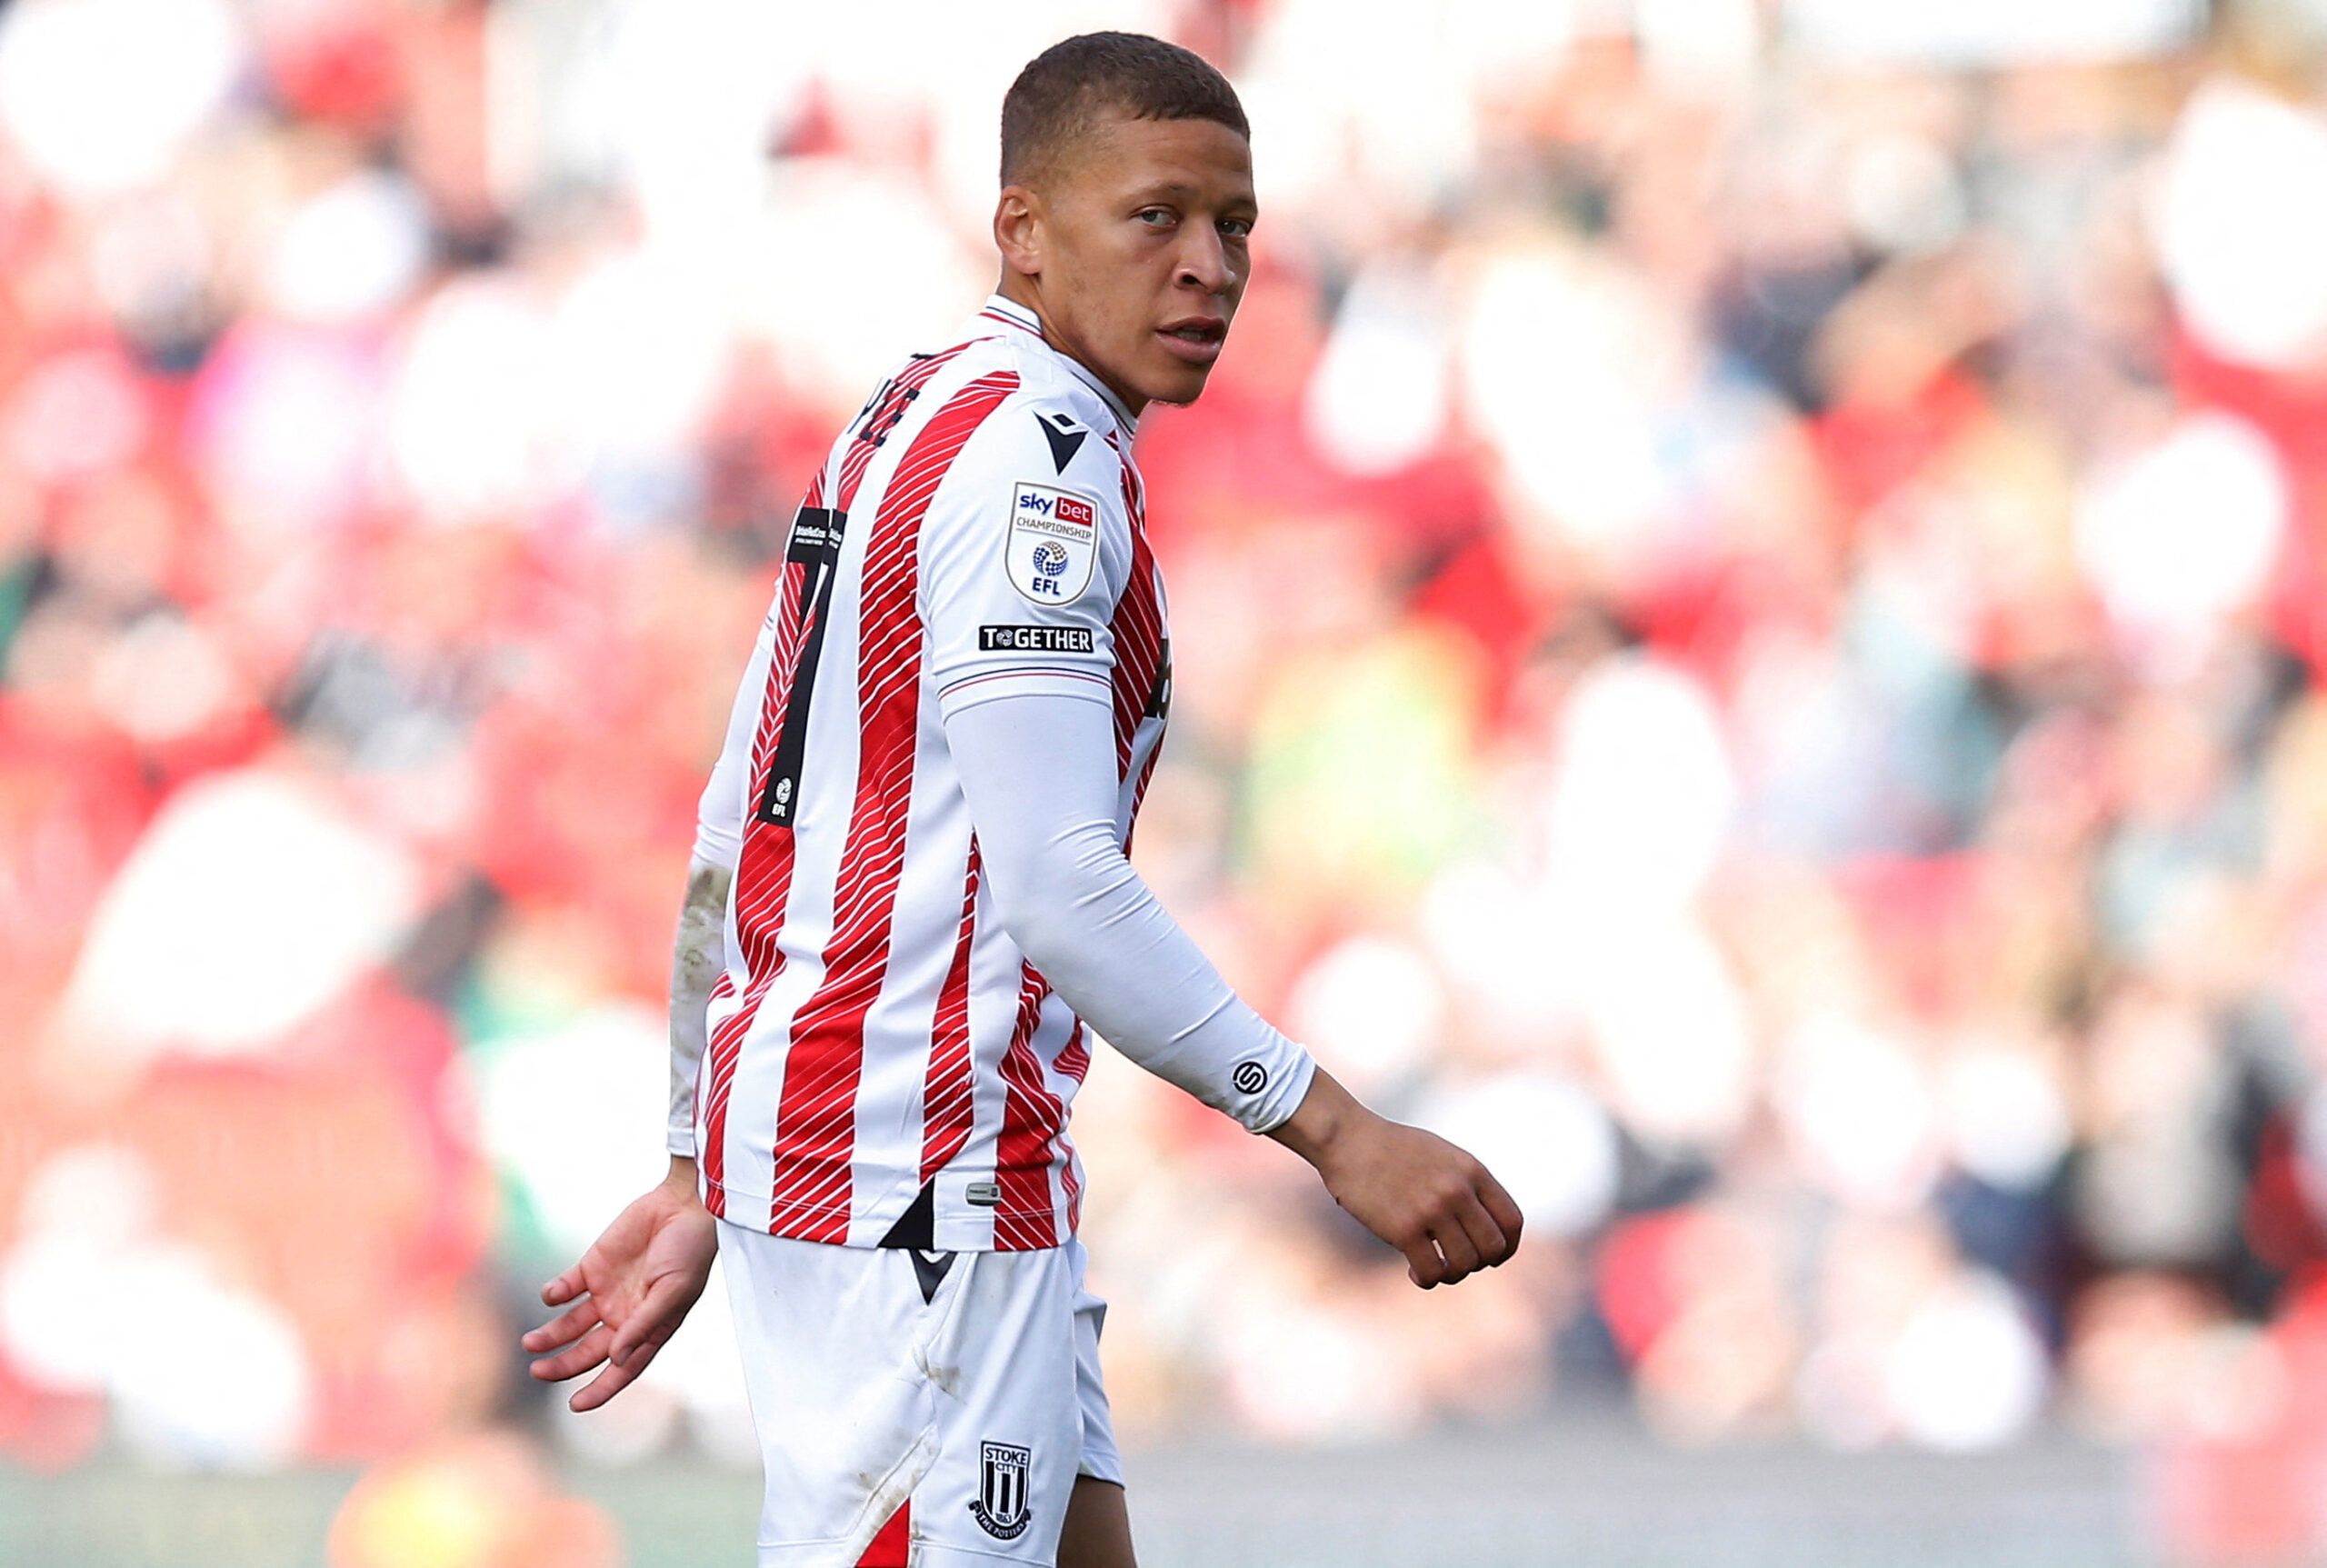 Soccer Football - Championship - Stoke City v Sheffield United - bet365 Stadium, Stoke-on-Trent, Britain - October 8, 2022 Stoke City's Dwight Gayle  Action Images/Craig Brough  EDITORIAL USE ONLY. No use with unauthorized audio, video, data, fixture lists, club/league logos or 